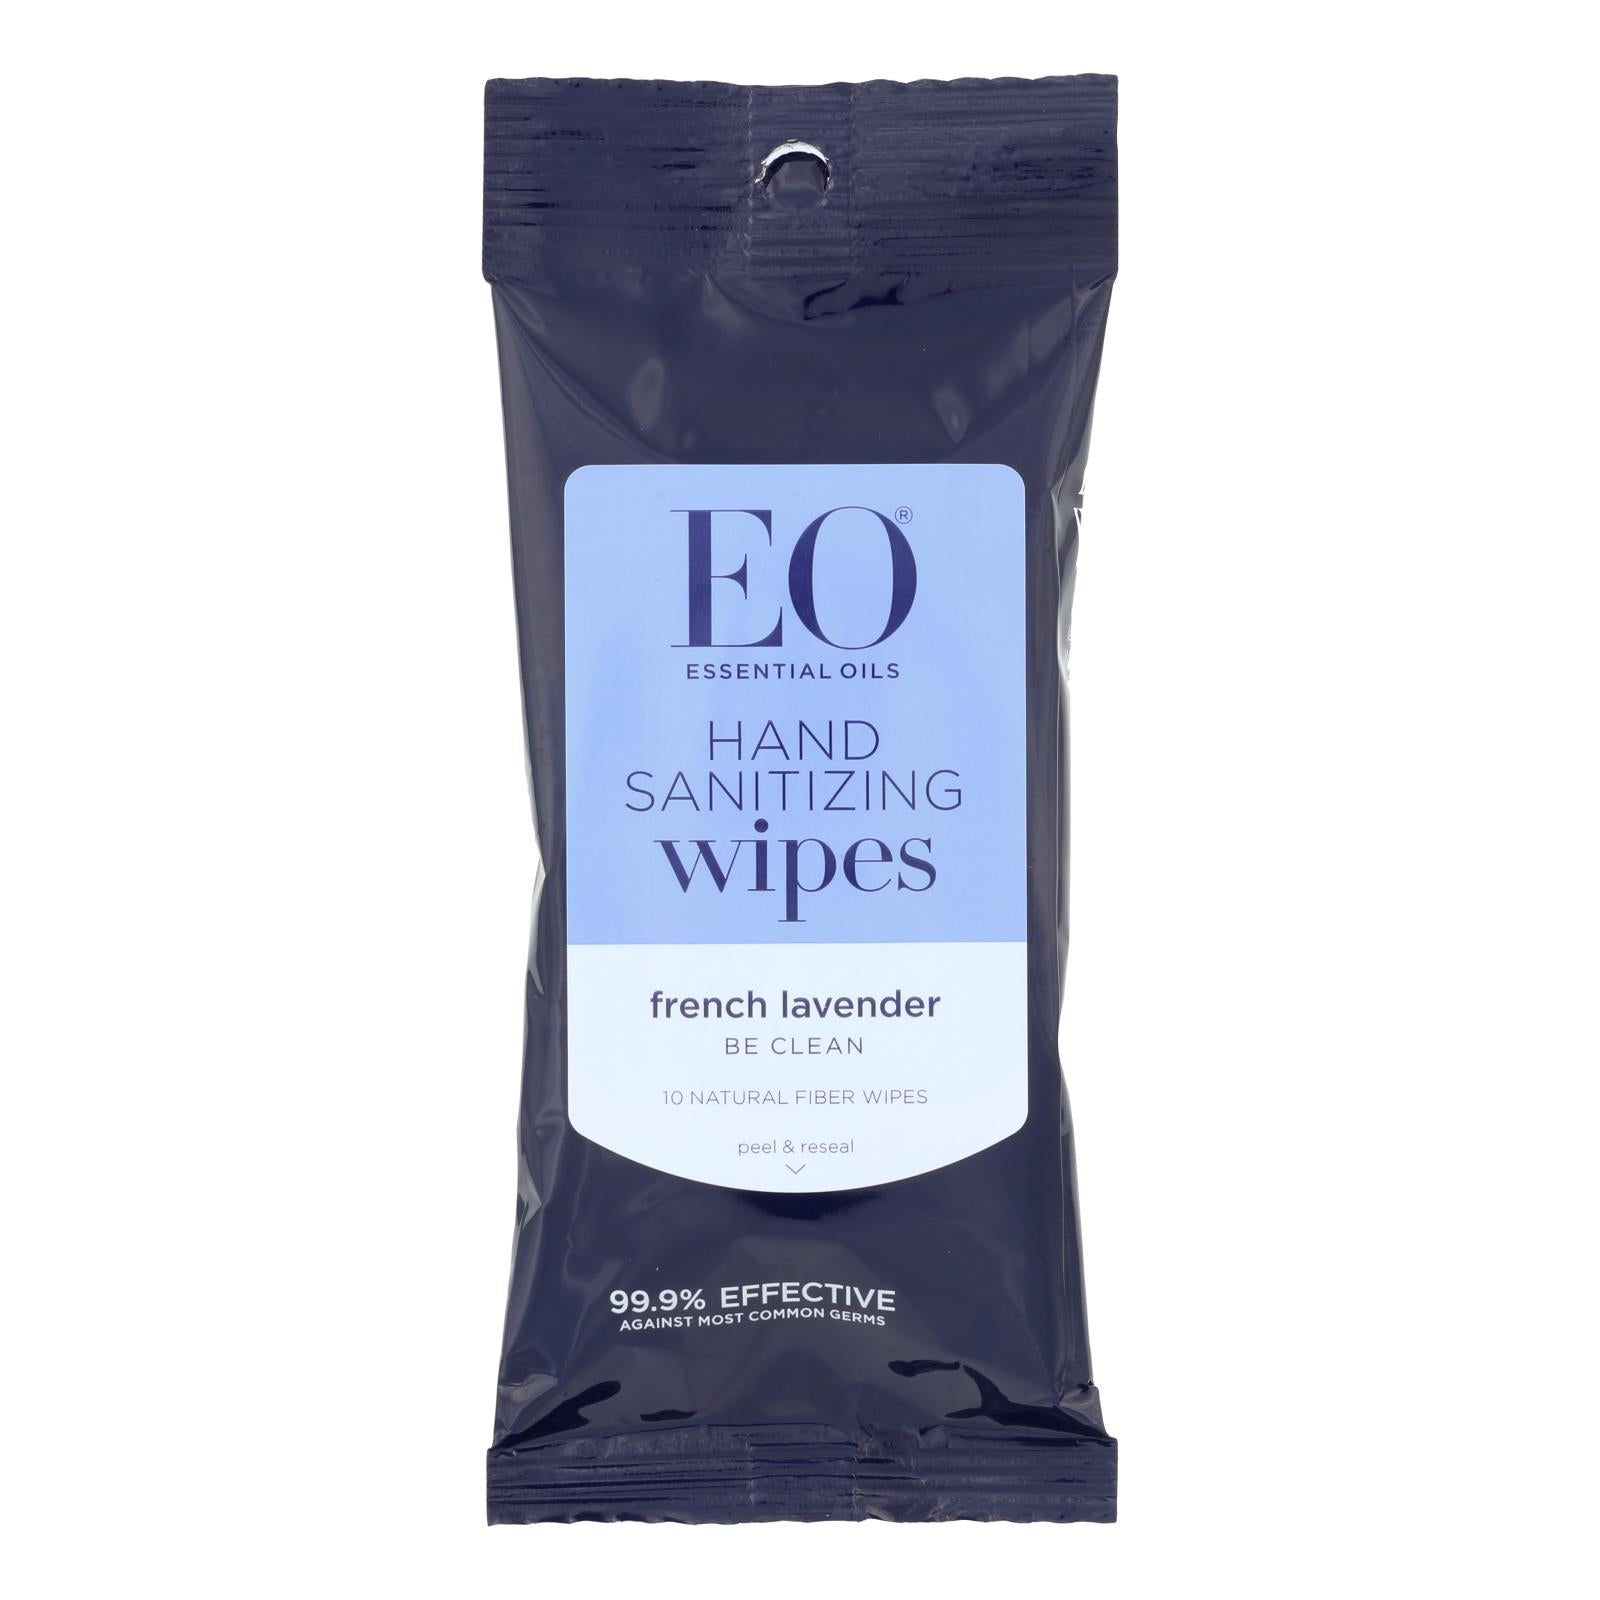 Eo Products - Hand Sanitizer Wipes Display Center - Lavender - Case Of 6 - 10 Pack - Whole Green Foods